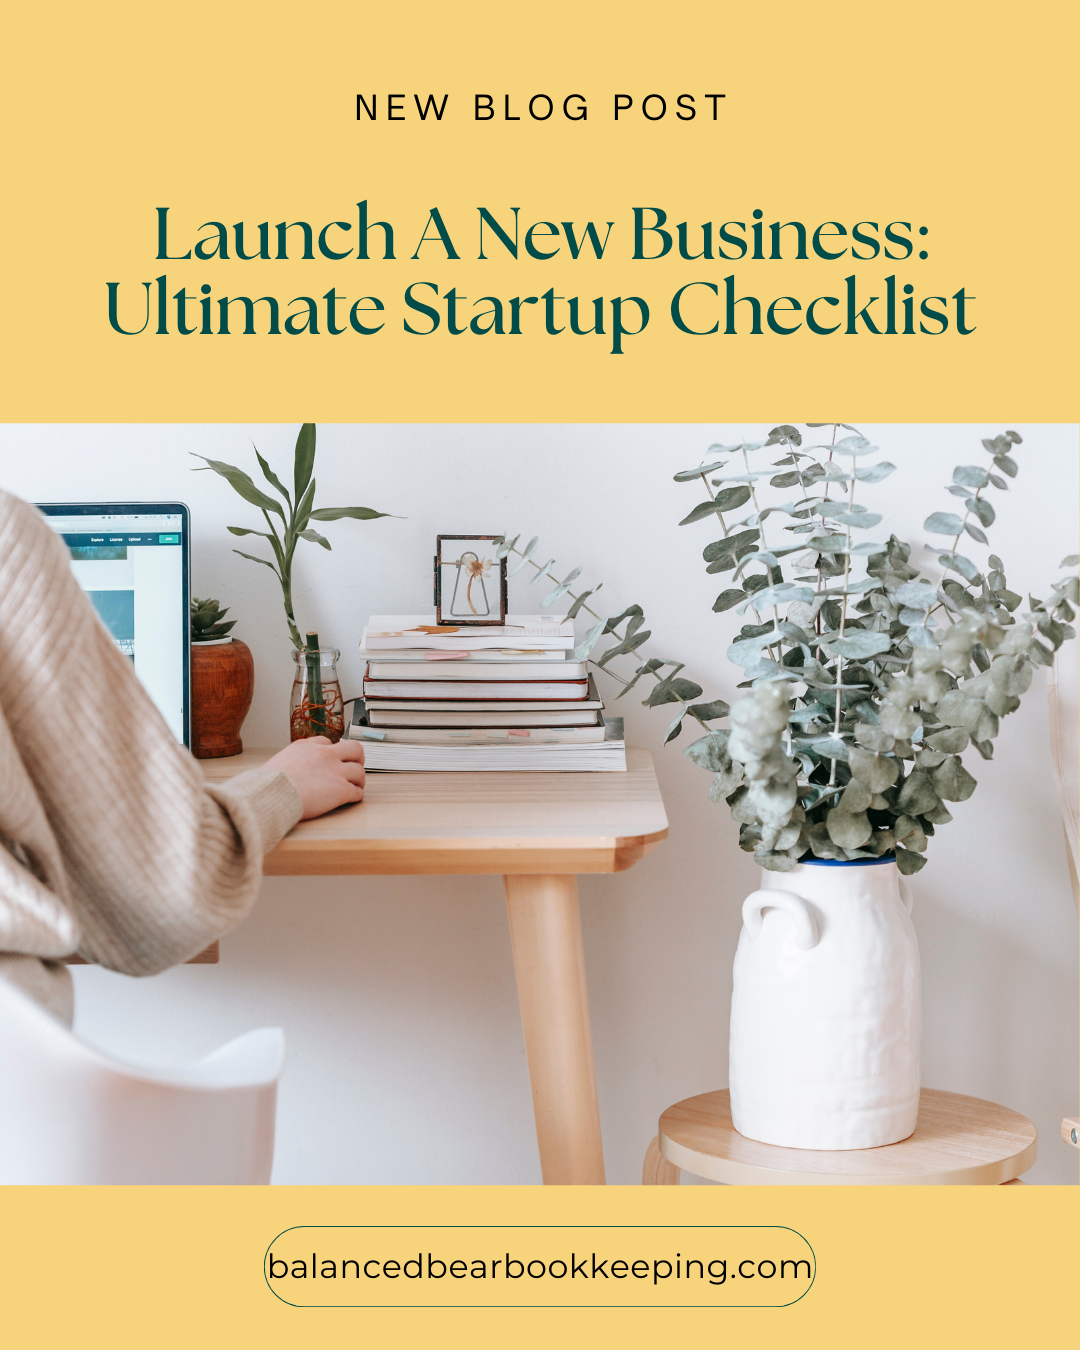 Launch A New Business: The Ultimate Startup Checklist